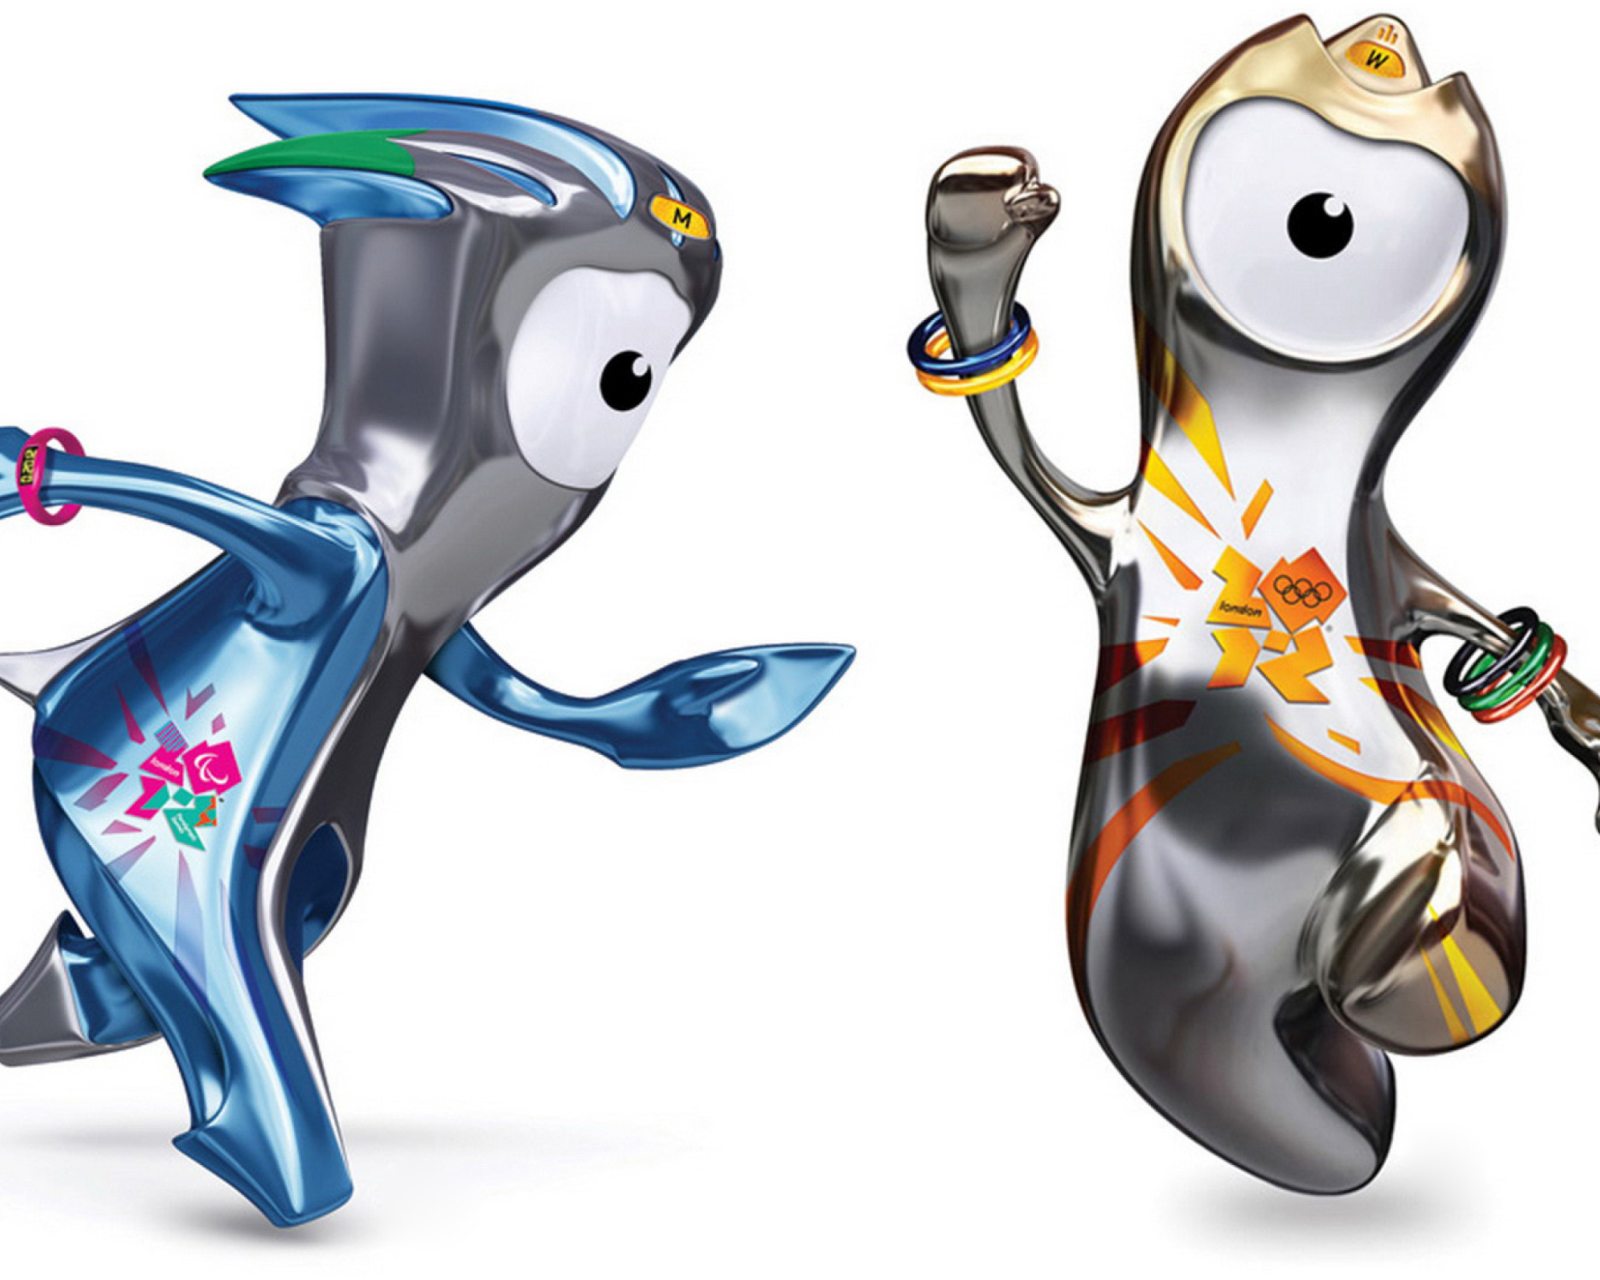 Wenlock and Mandevillelond 2012 Olympic Games wallpaper 1600x1280